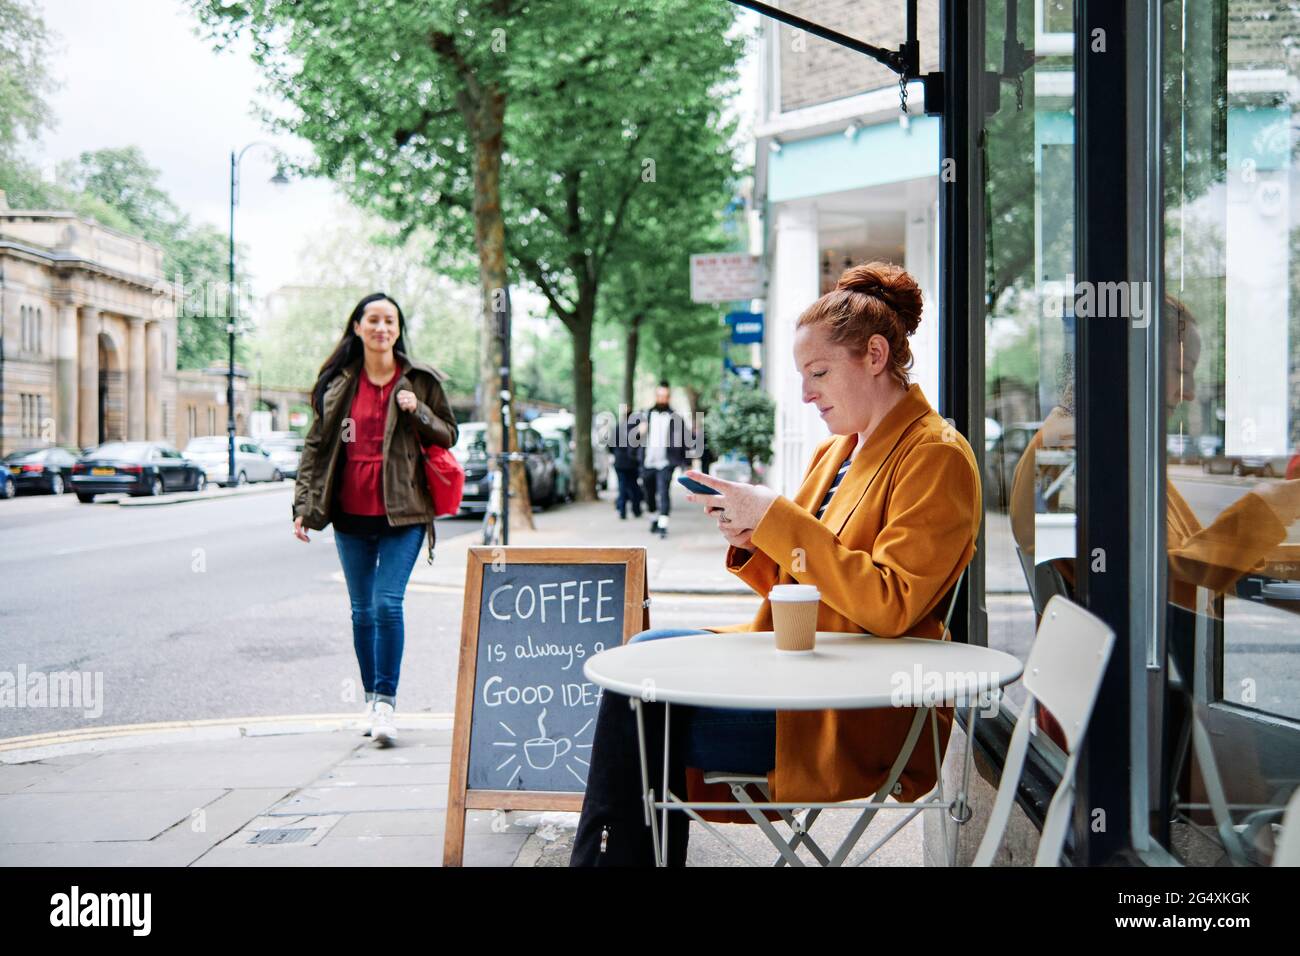 Woman using mobile phone at sidewalk cafe Stock Photo